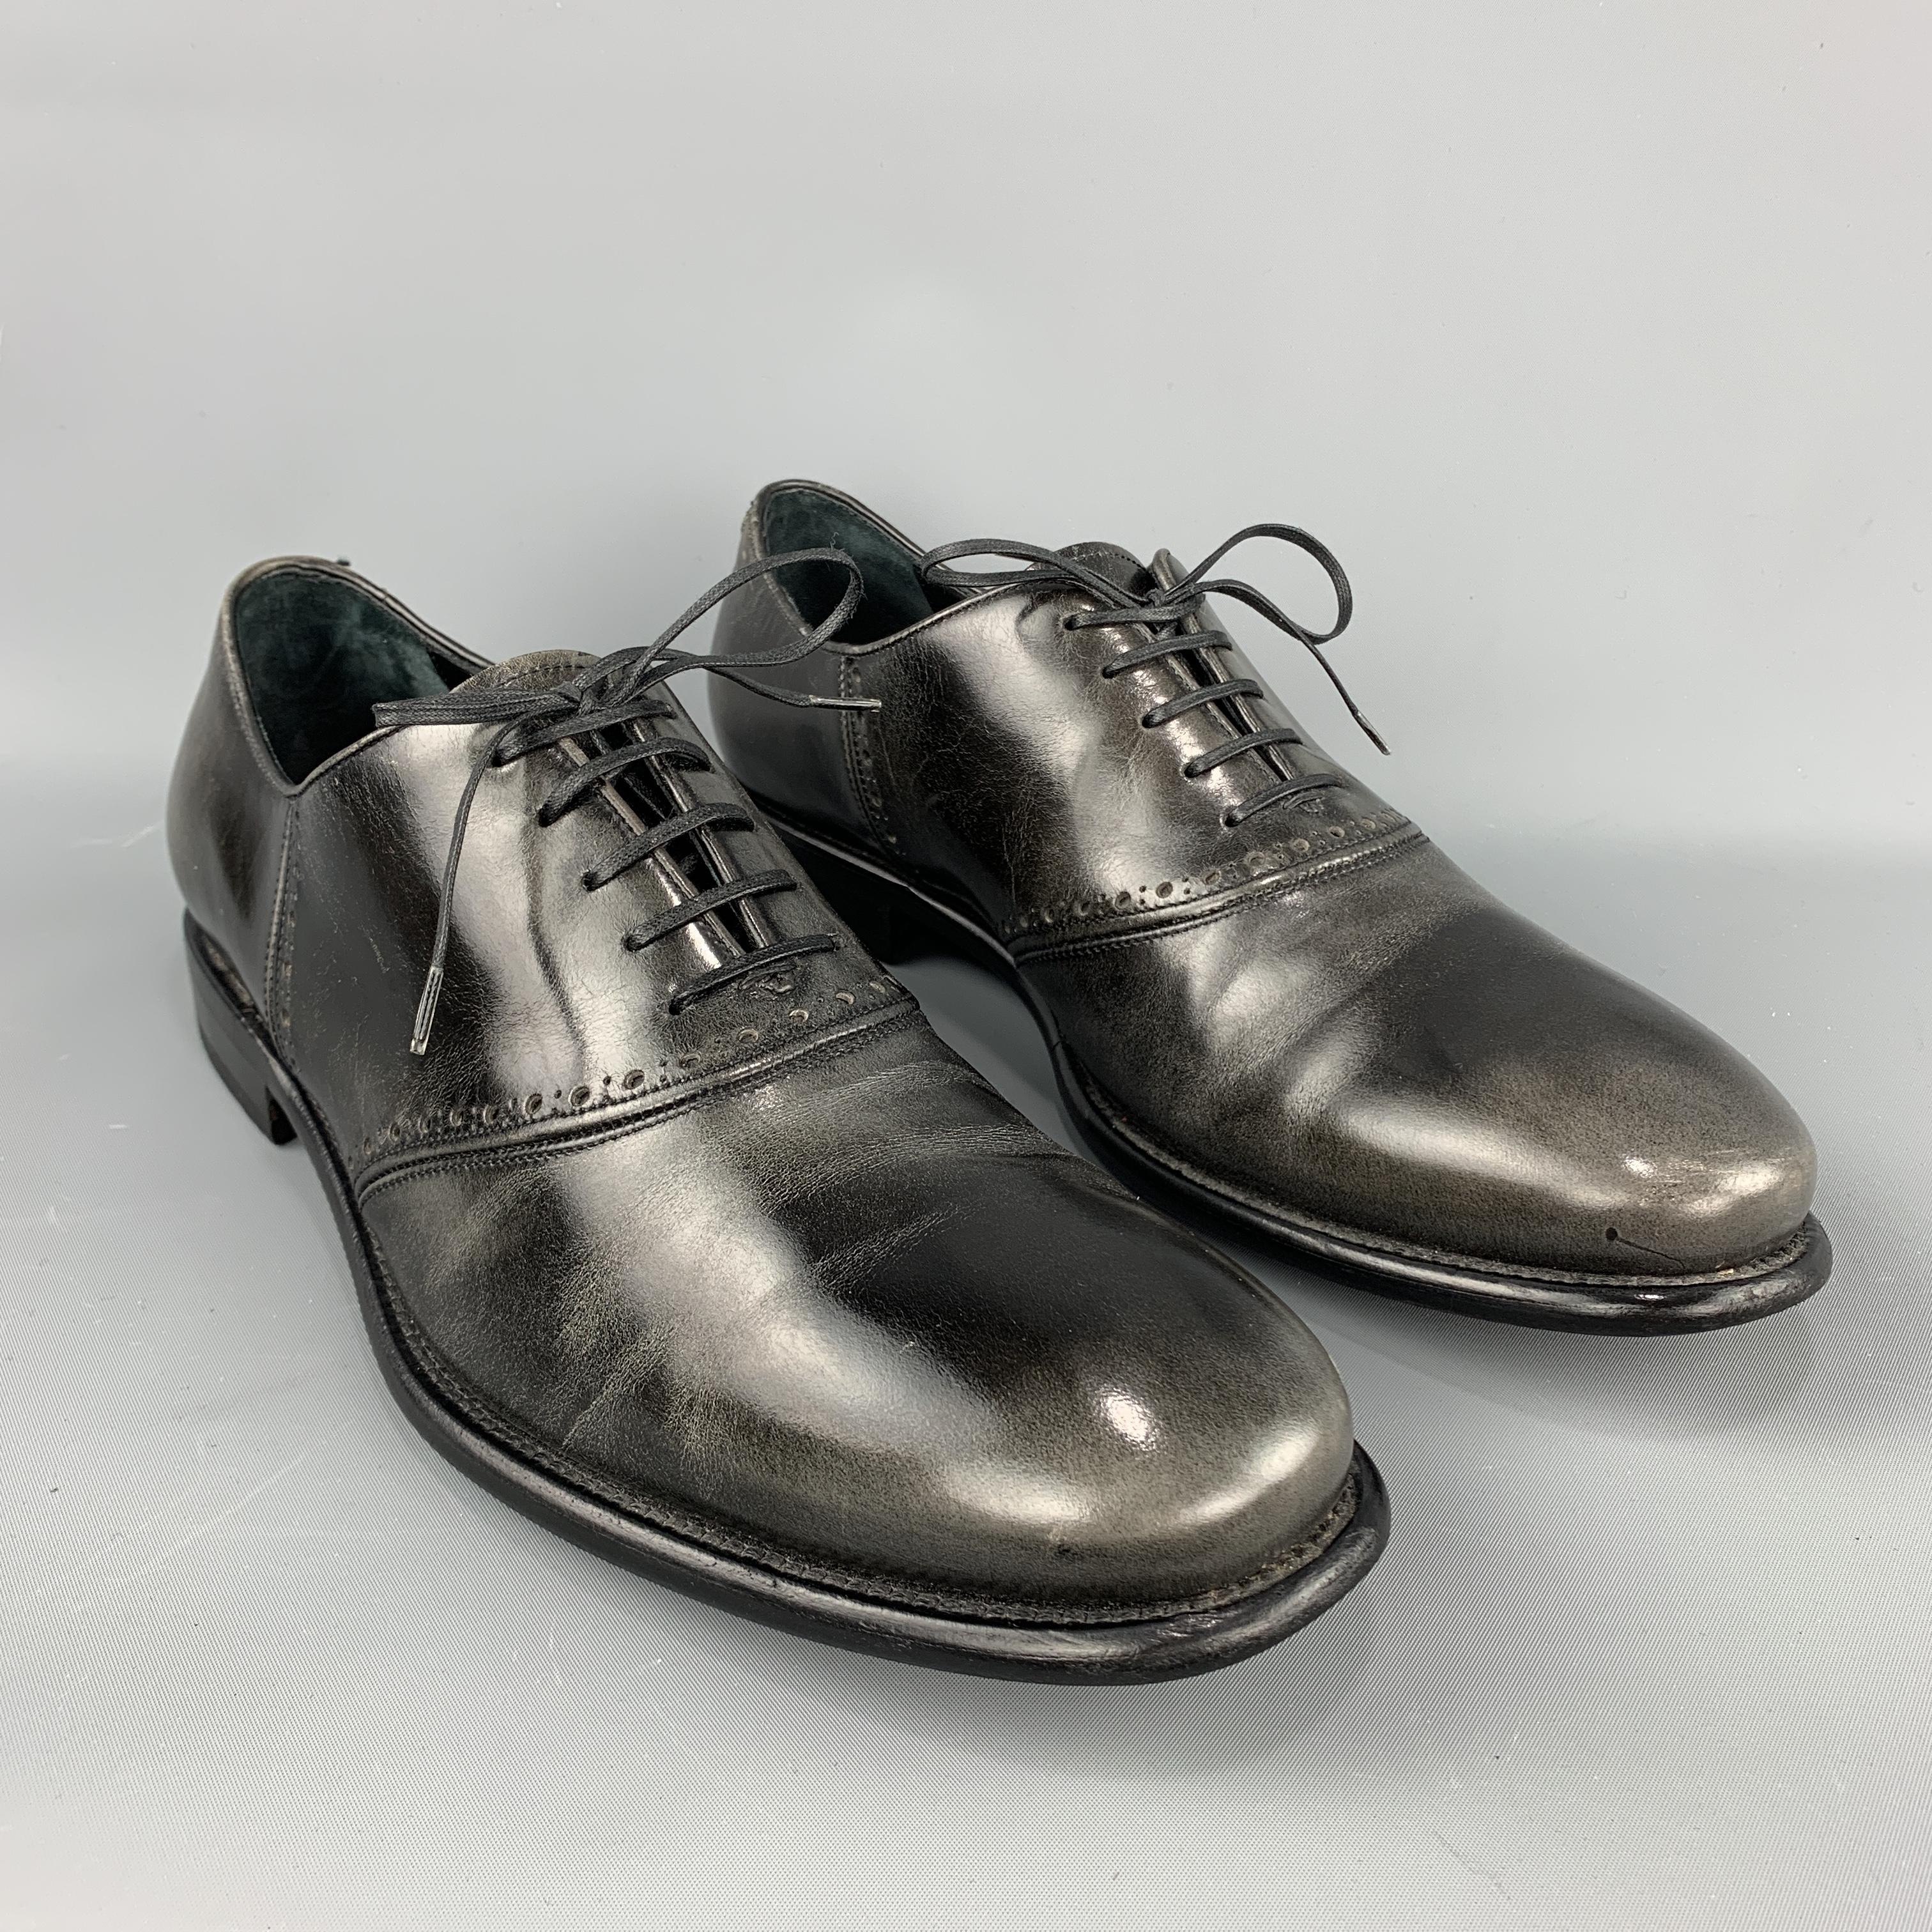 SALVATORE FERRAGAMO Derby Dress Lace up Shoes comes in a black tone in a leather material, with an Antique style effect, a rounded point toe, and a leather sole. Made in Italy.

Excellent Pre-Owned Condition.
Marked: 11   00VF  94022  11 